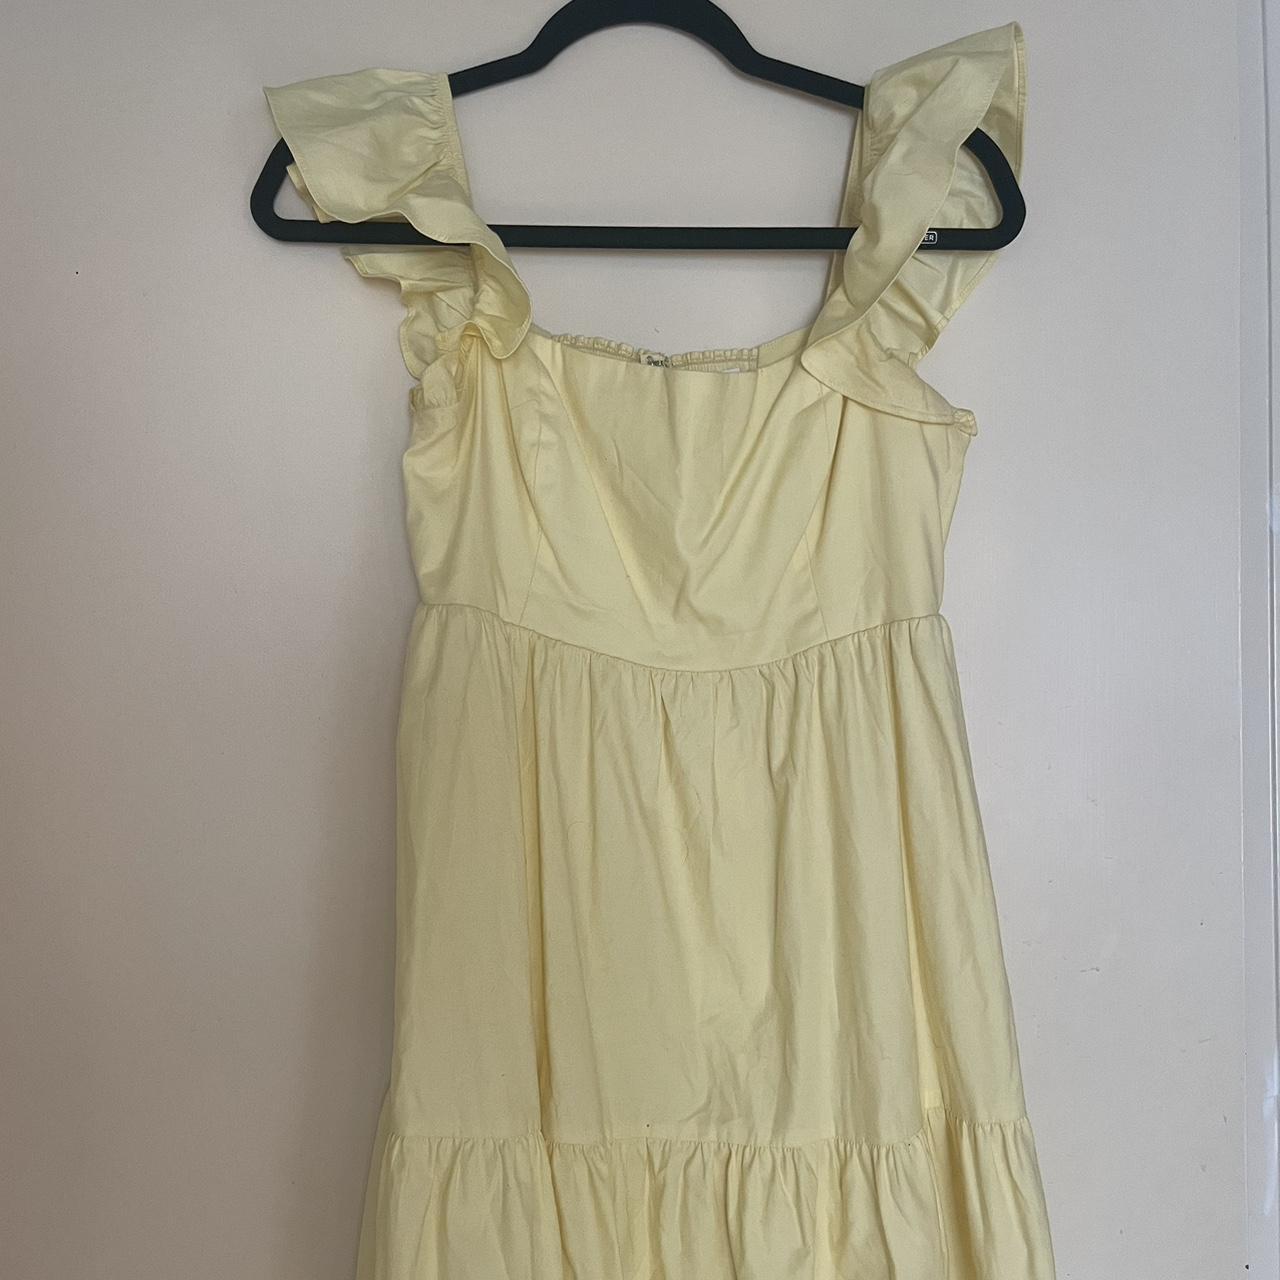 Yellow Reformation dress Worn once - minor flaws... - Depop